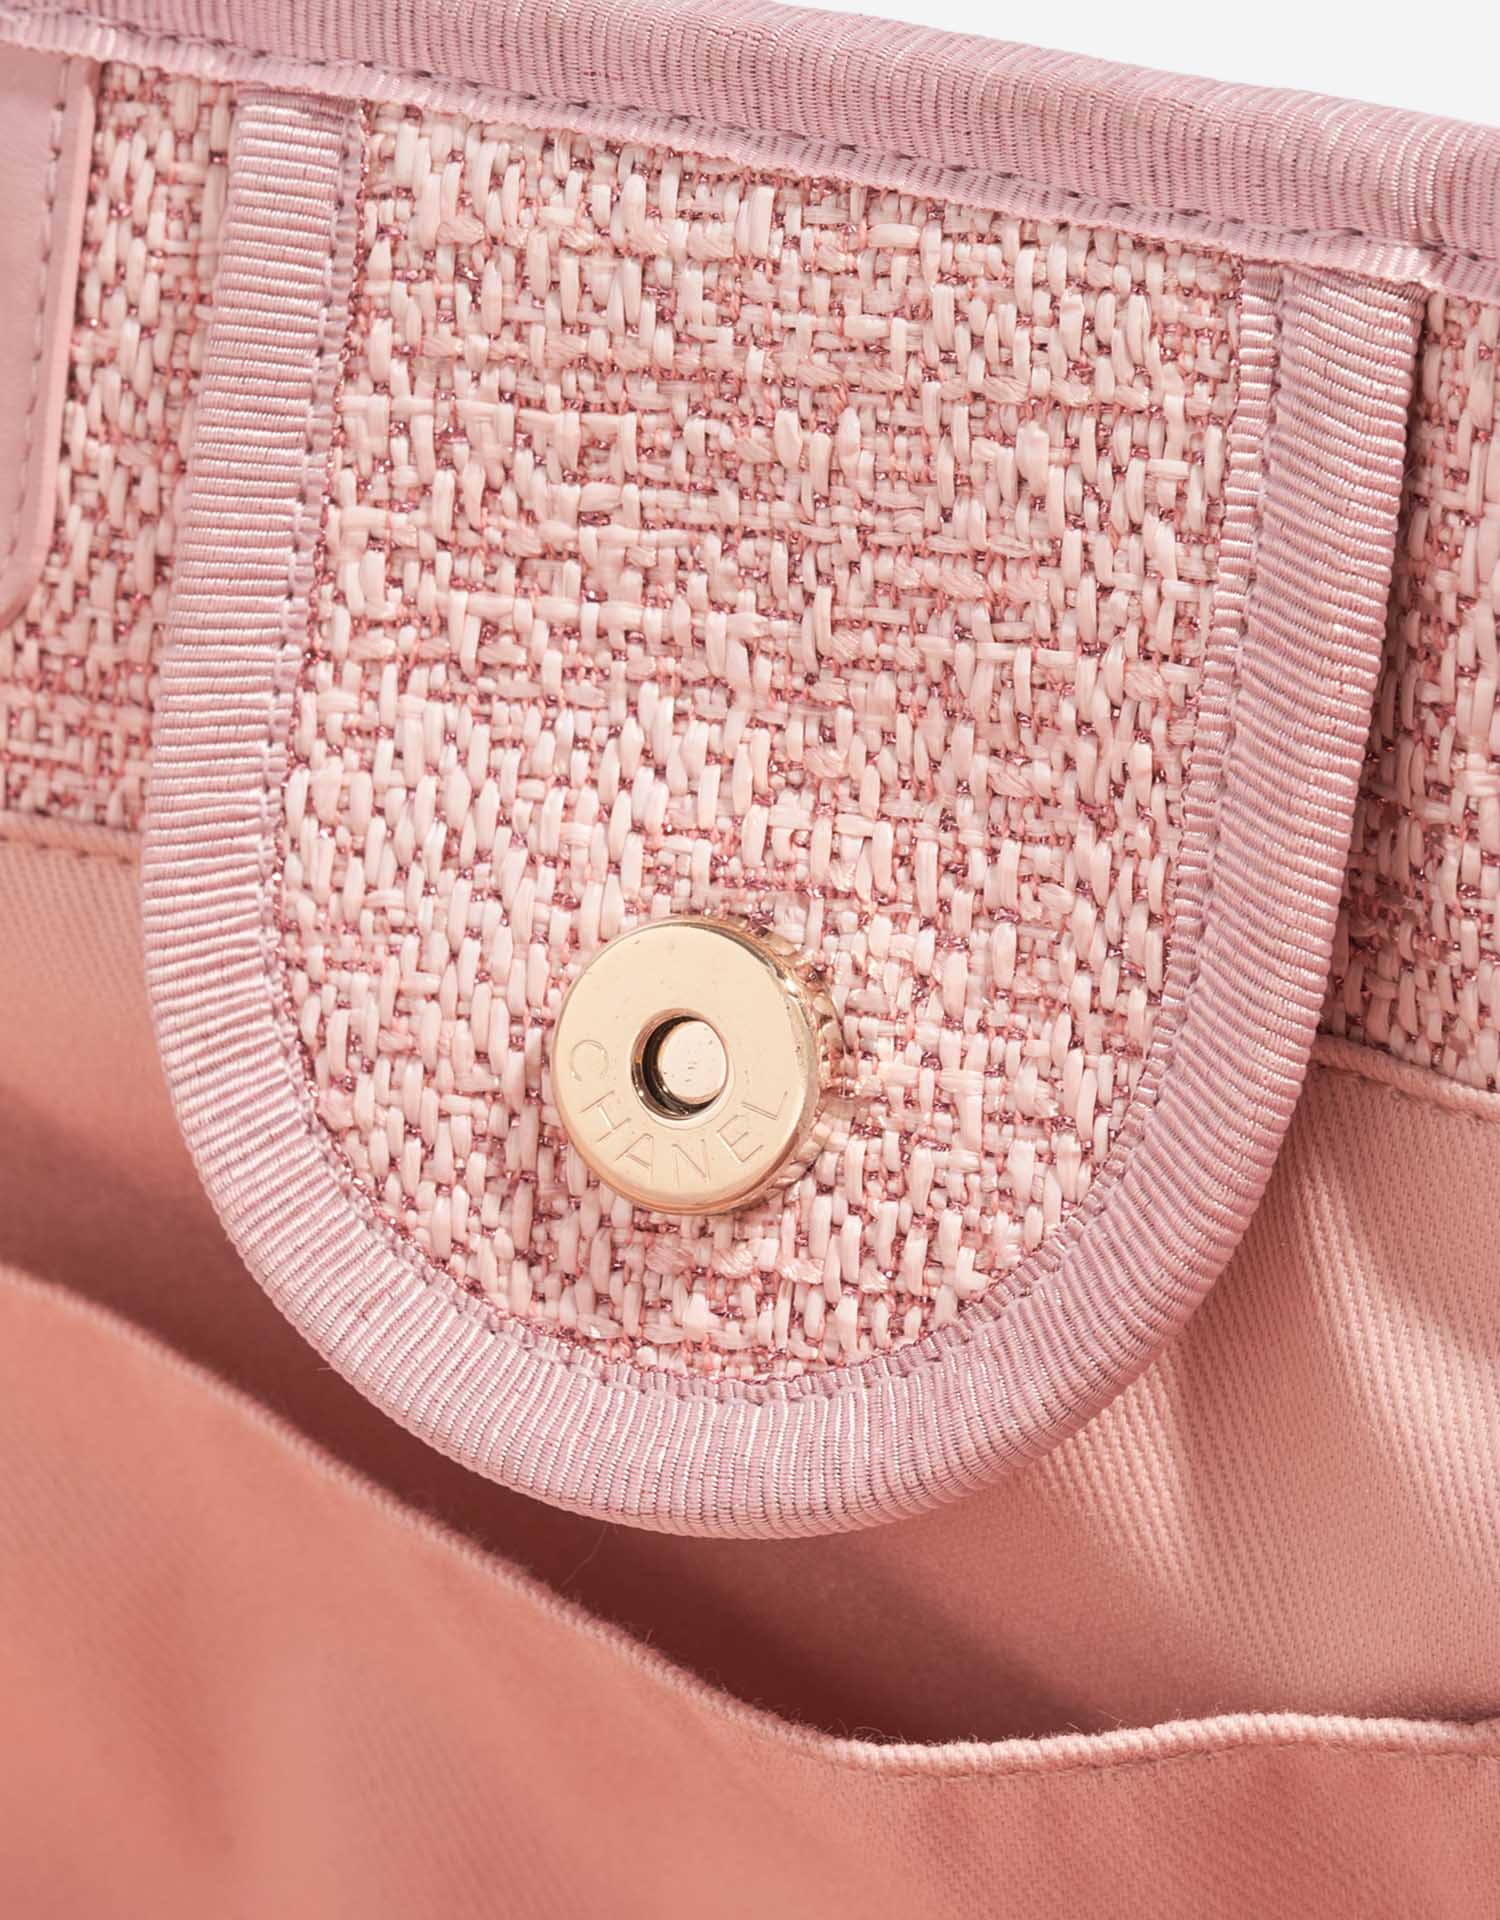 Pre-owned Chanel bag Deauville Medium Tweed Pink Pink Closing System | Sell your designer bag on Saclab.com